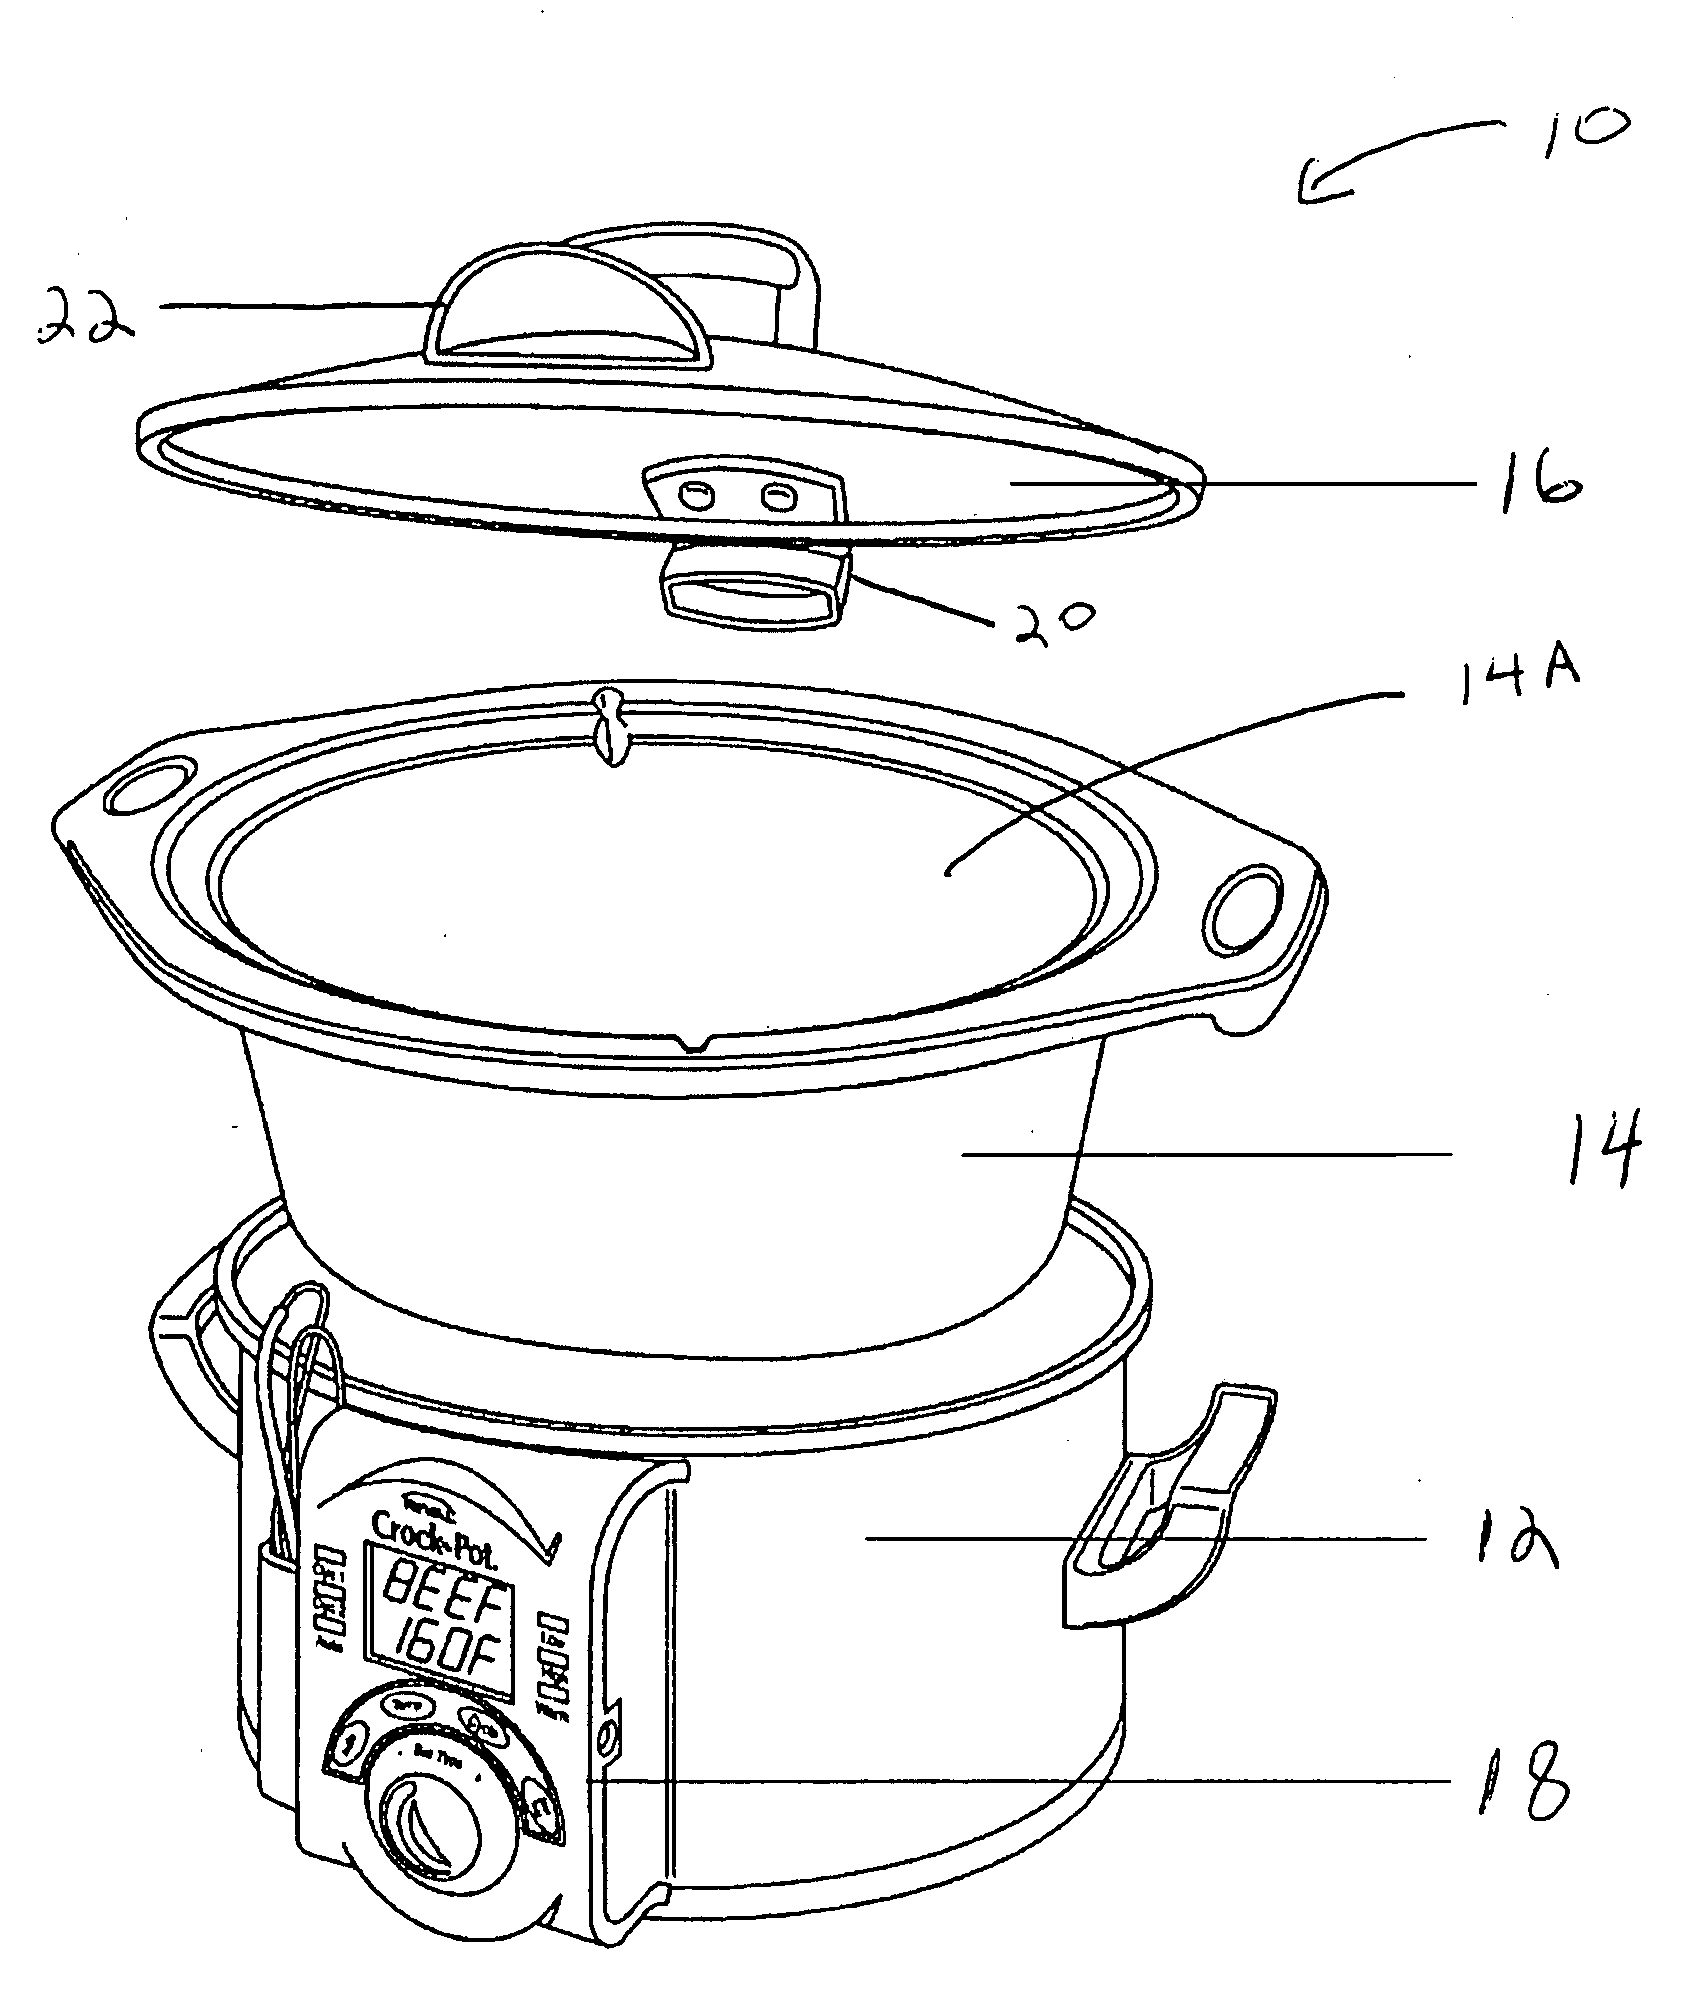 Cooking apparatus with temperature probe and hinged lid